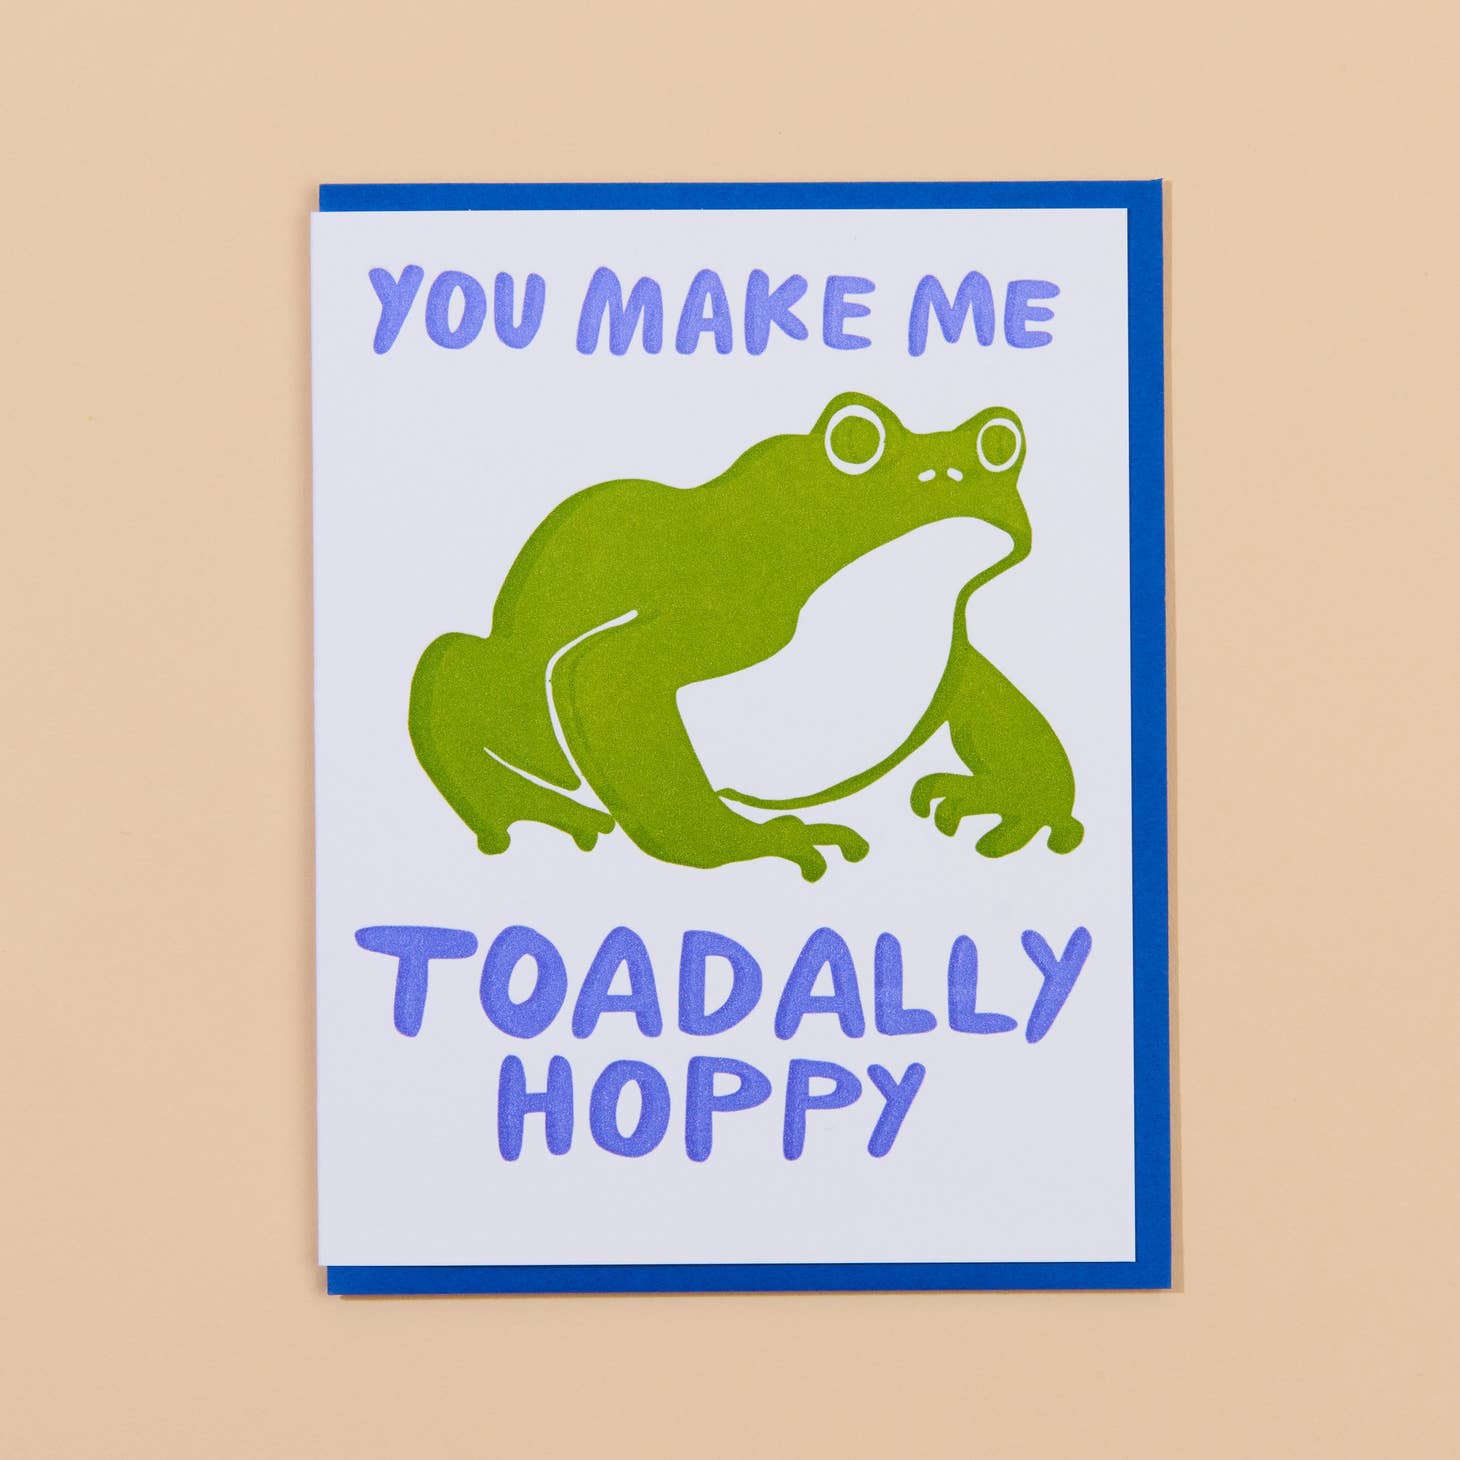 White card with image of a green toad and blue text that says “You make me toadally hoppy”. Blue envelope included.        